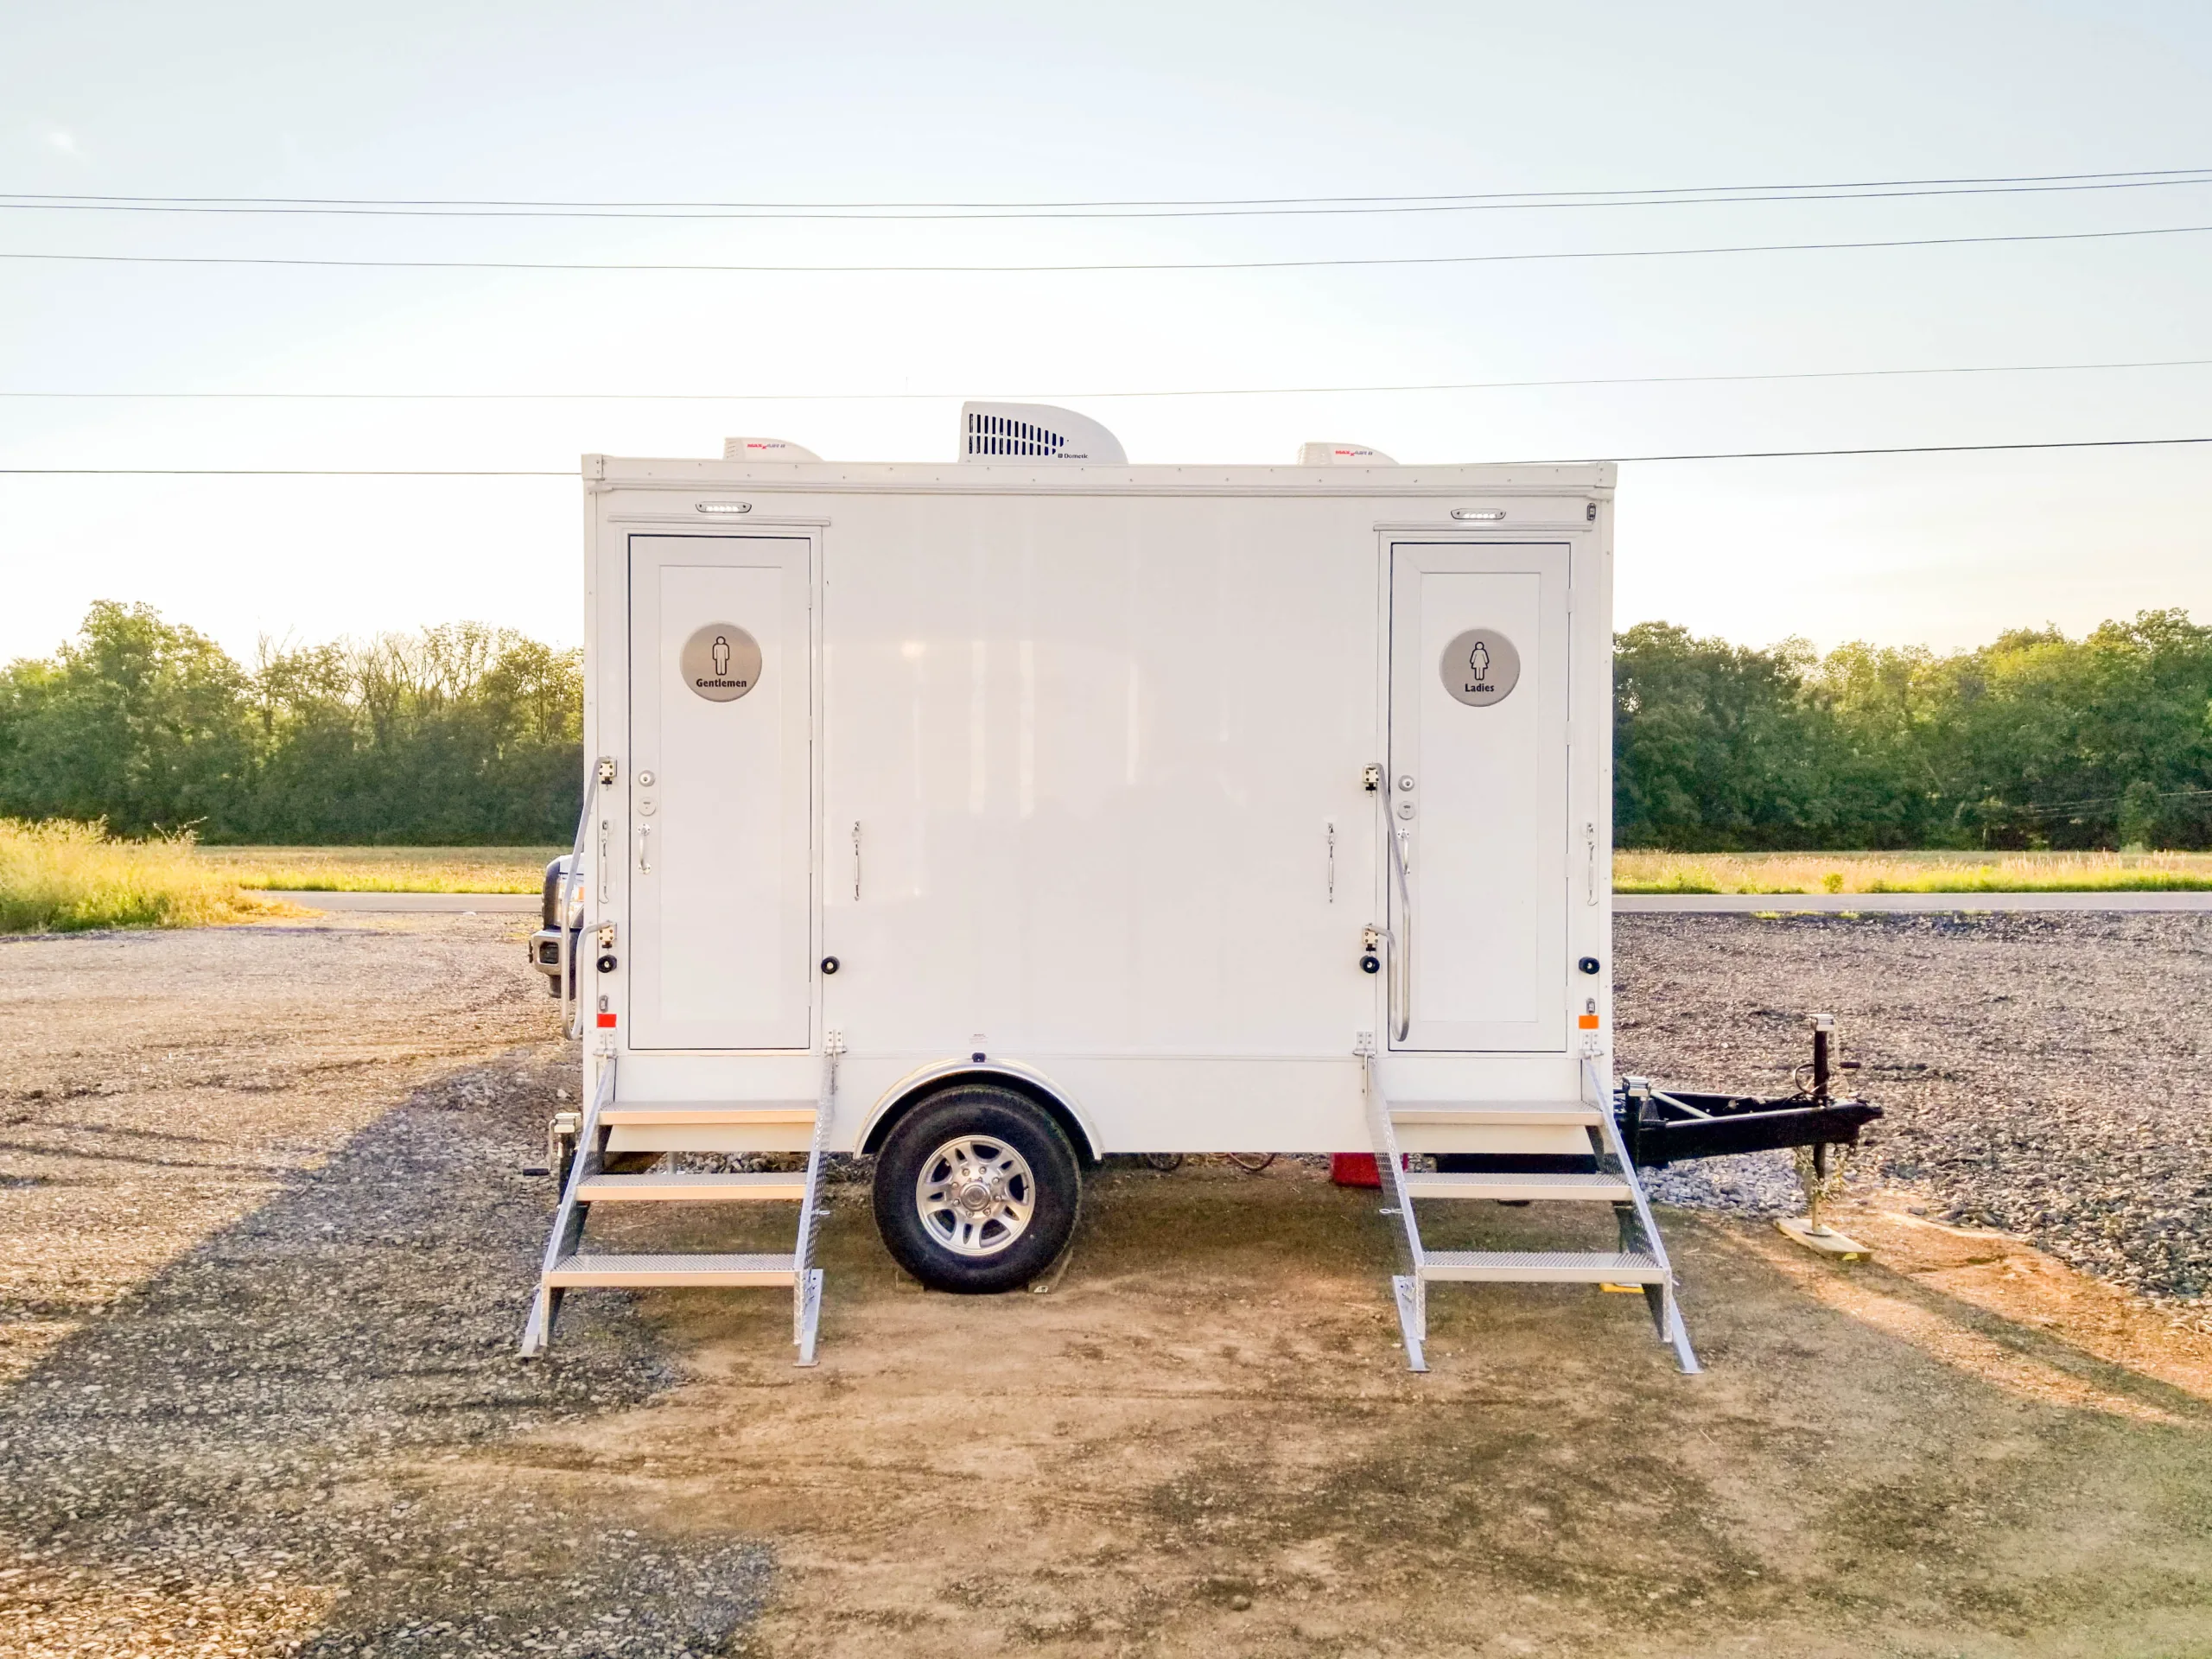 toilet trailer with 2 units